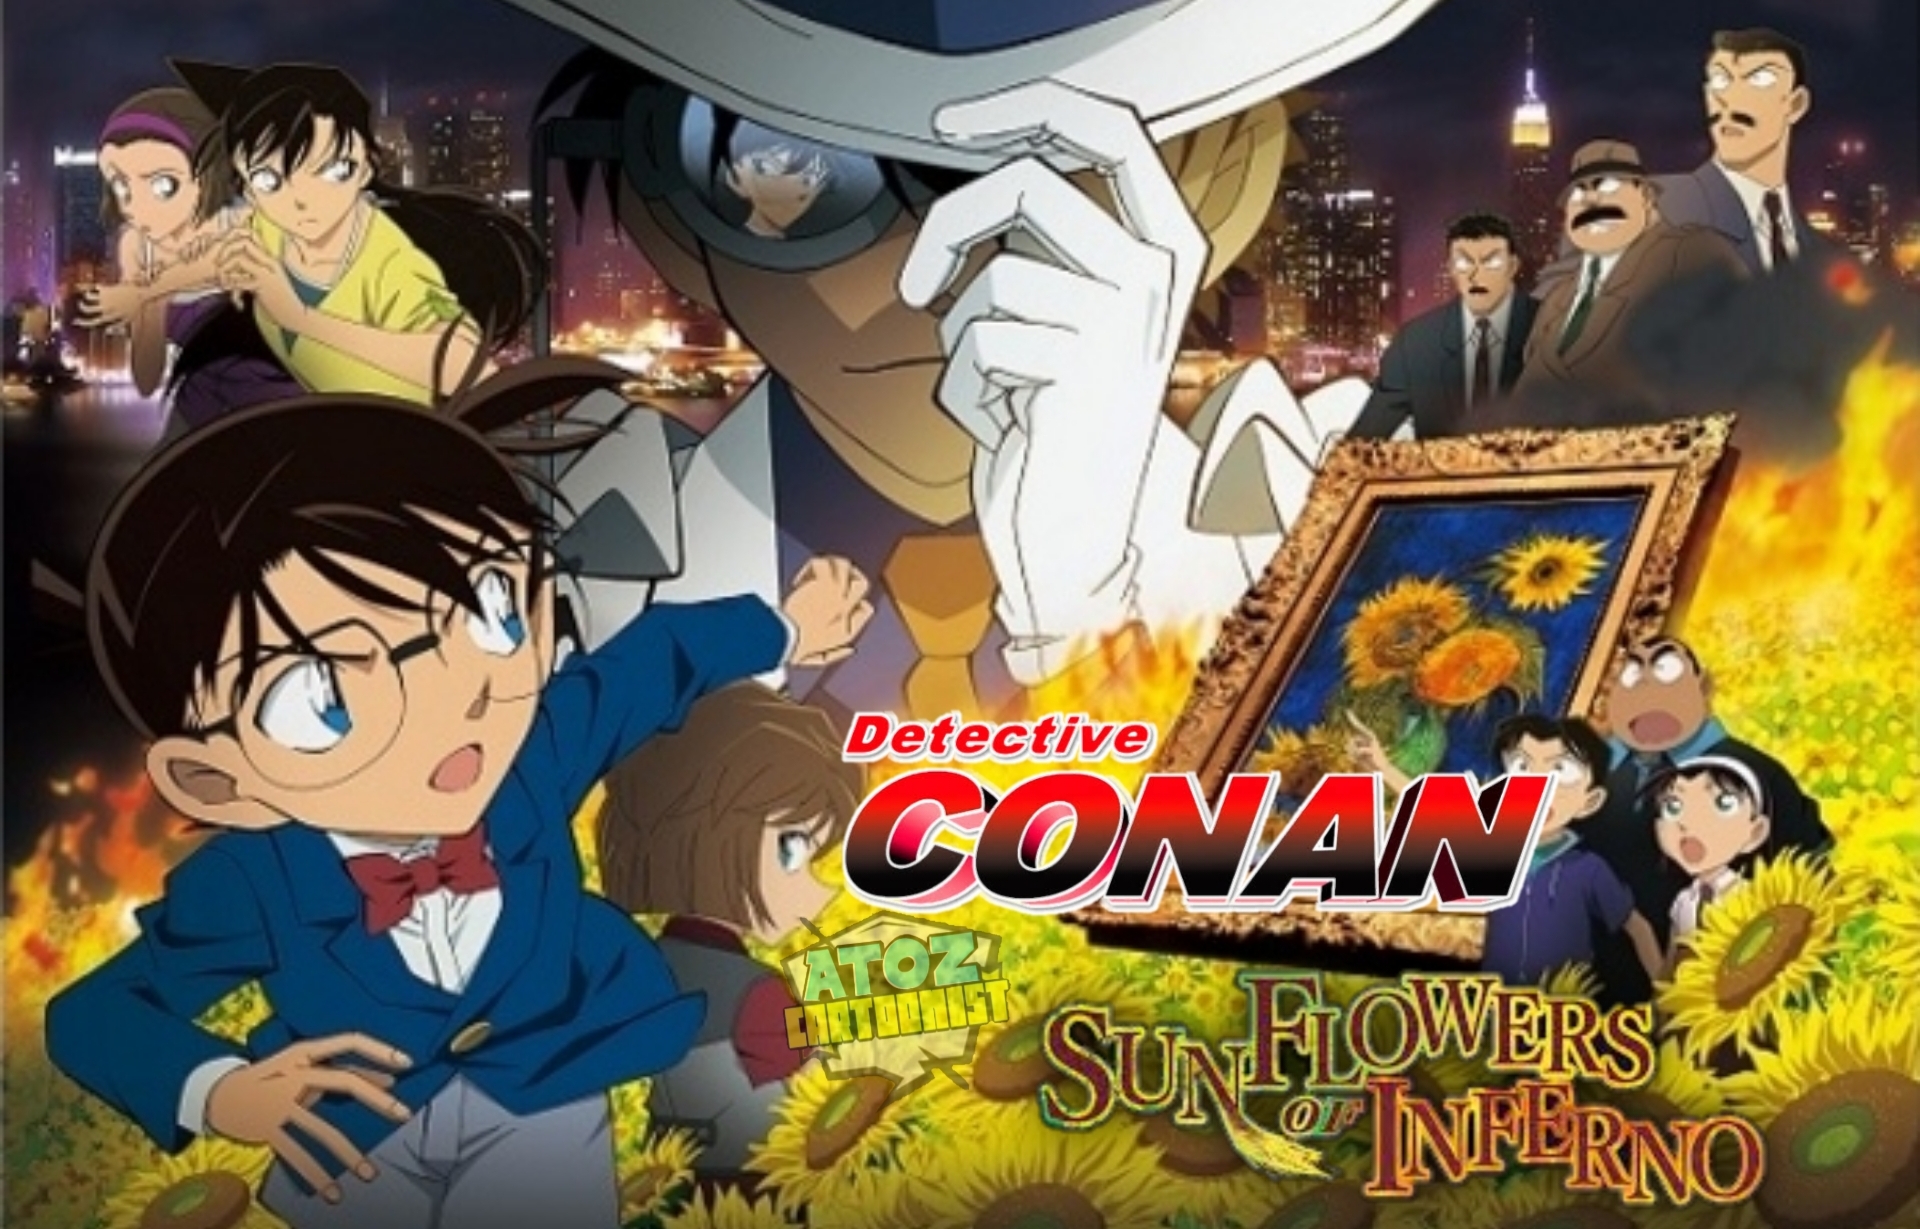 Detective Conan: Sunflowers Of Inferno Download (1080p),